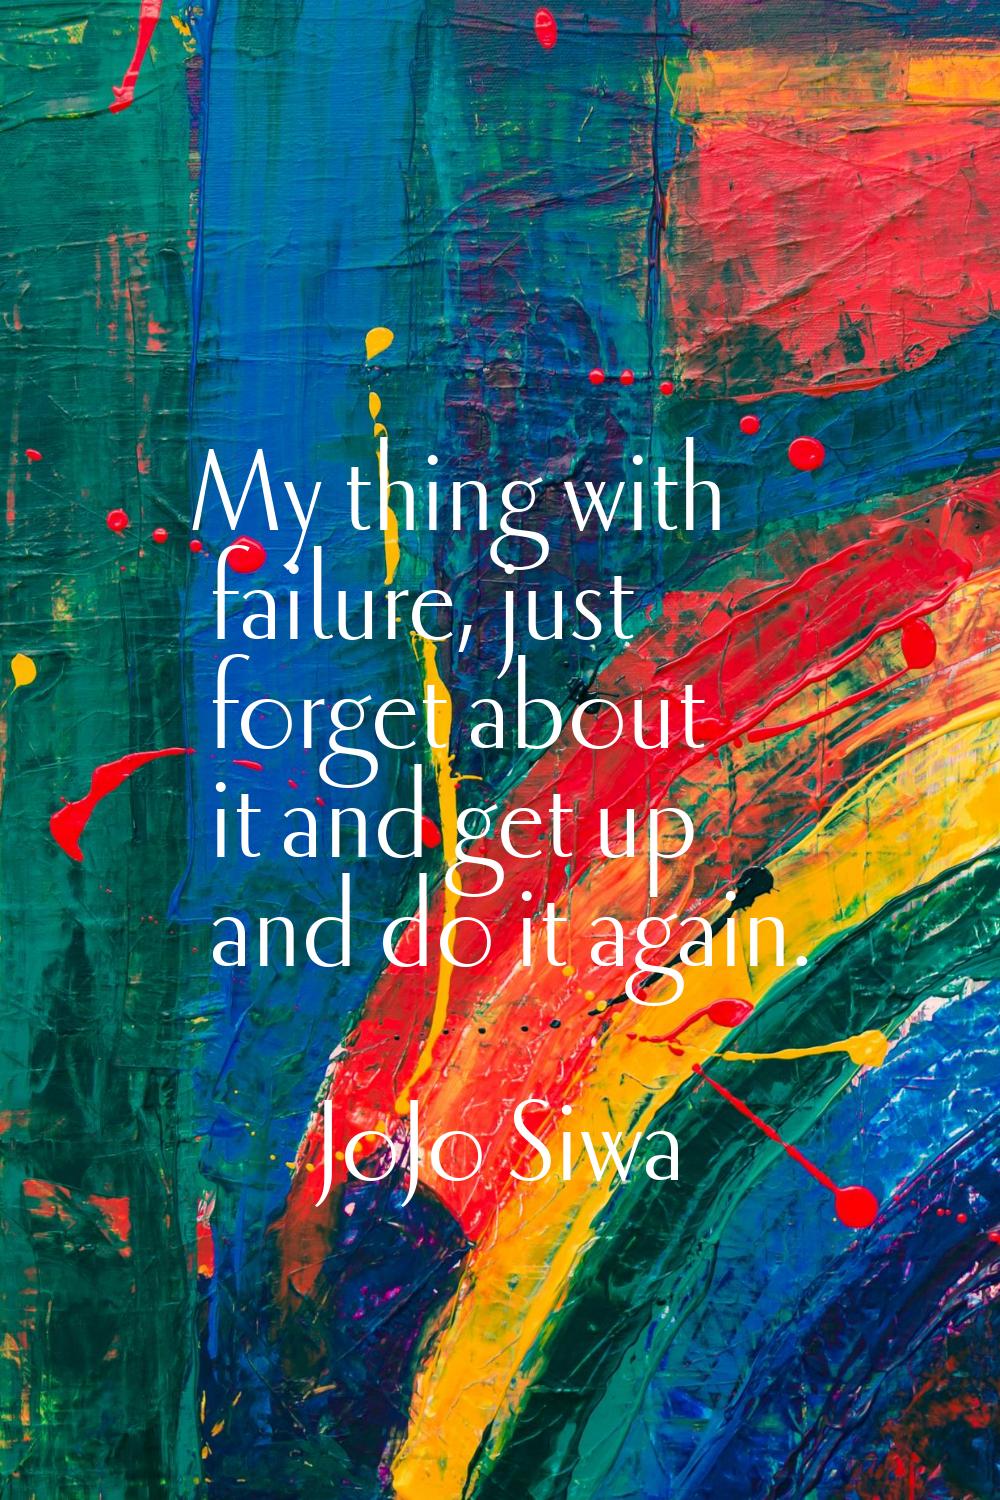 My thing with failure, just forget about it and get up and do it again.